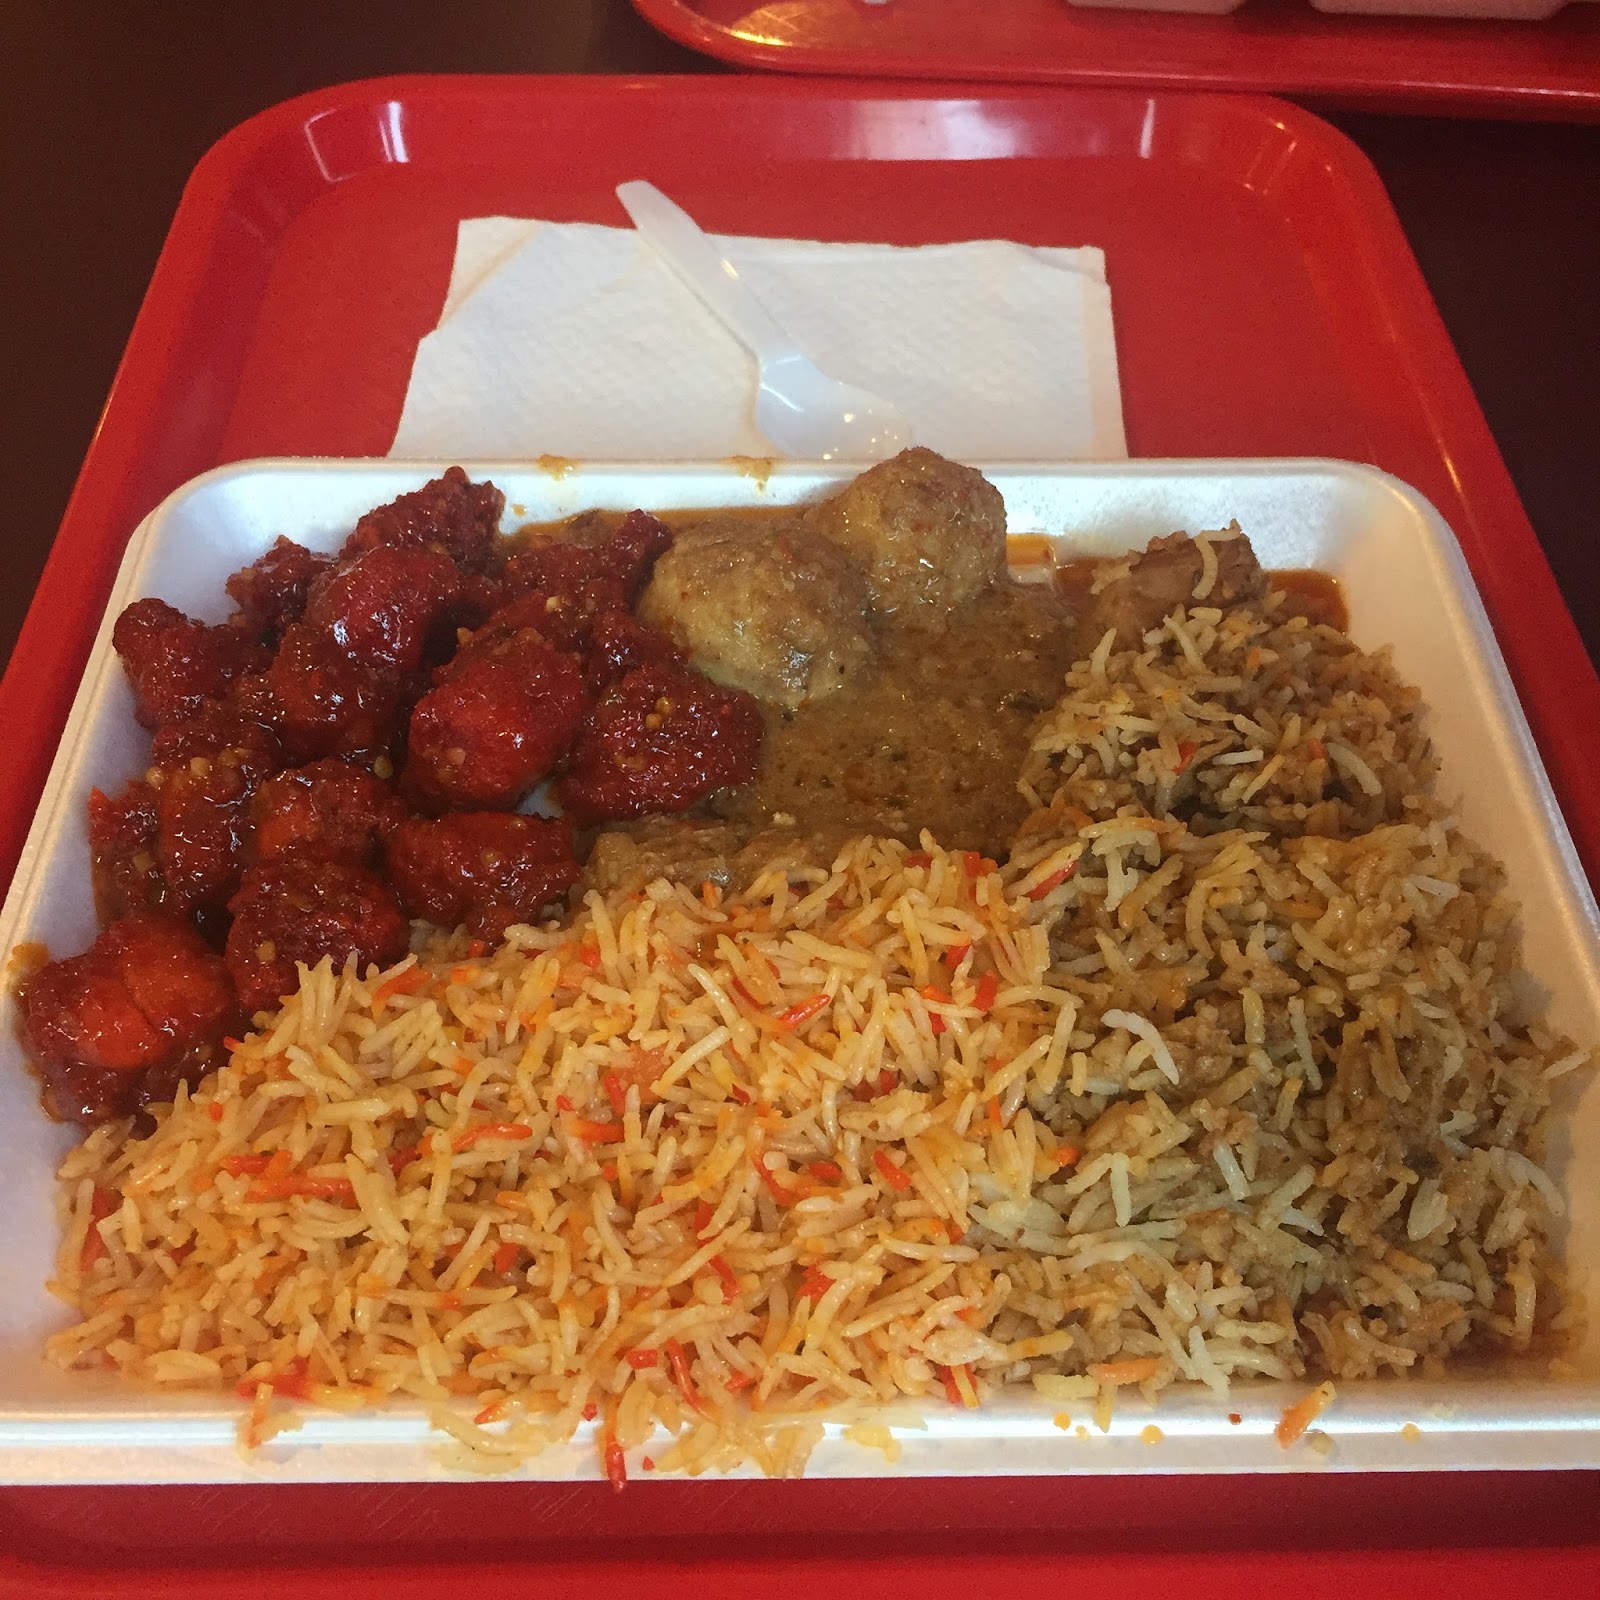 Zain's Halal Reviews: Spice Station: A Halal Desi Restaurant in South